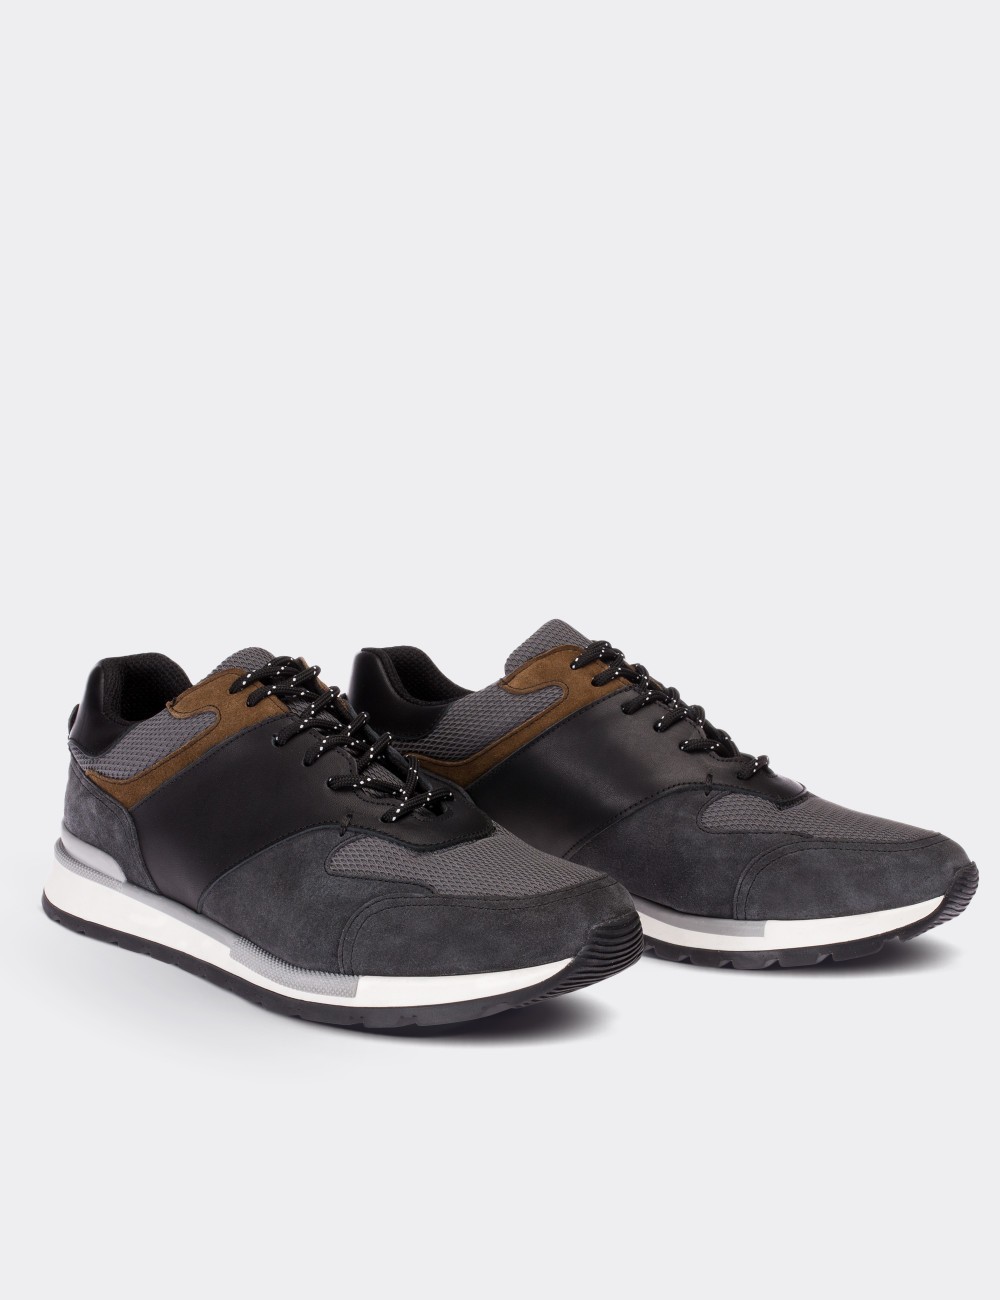 Gray Suede Leather Sneakers - 01718MGRIT02